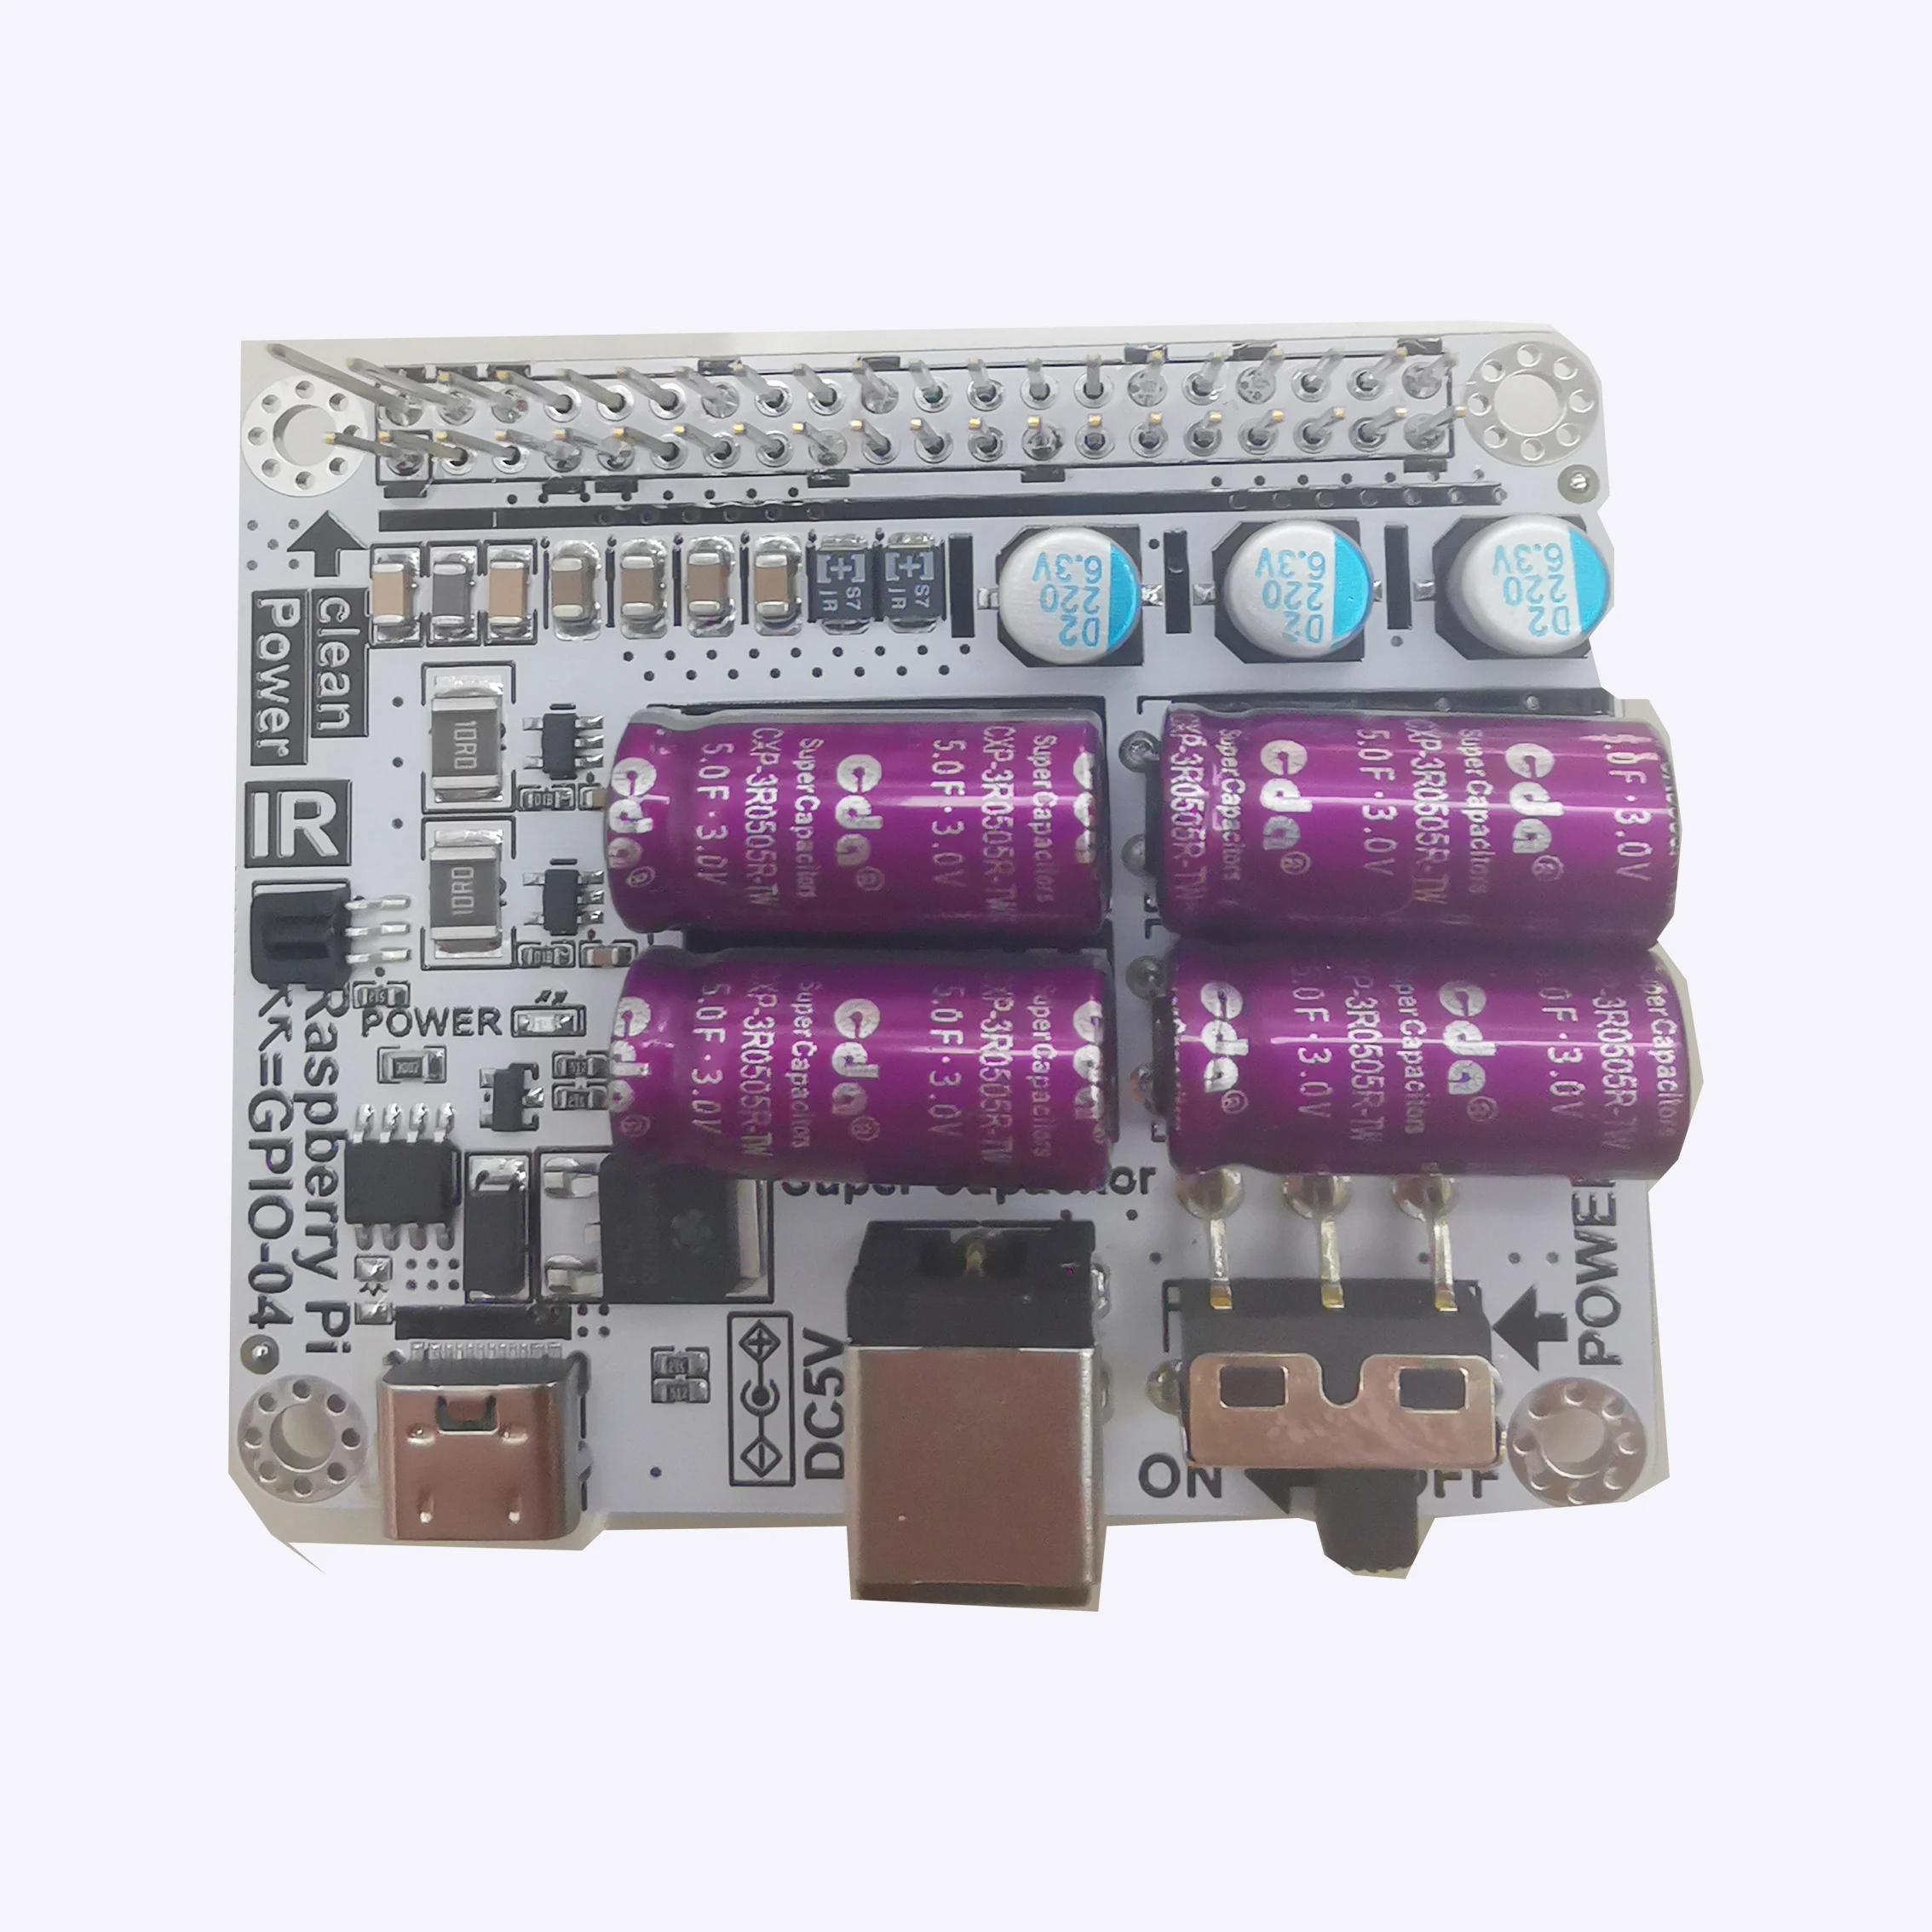 Power Filter Purification Board moode volumio For Raspberry Pi DAC Audio Decoder Board HIFI Expansion MoudleA6-001